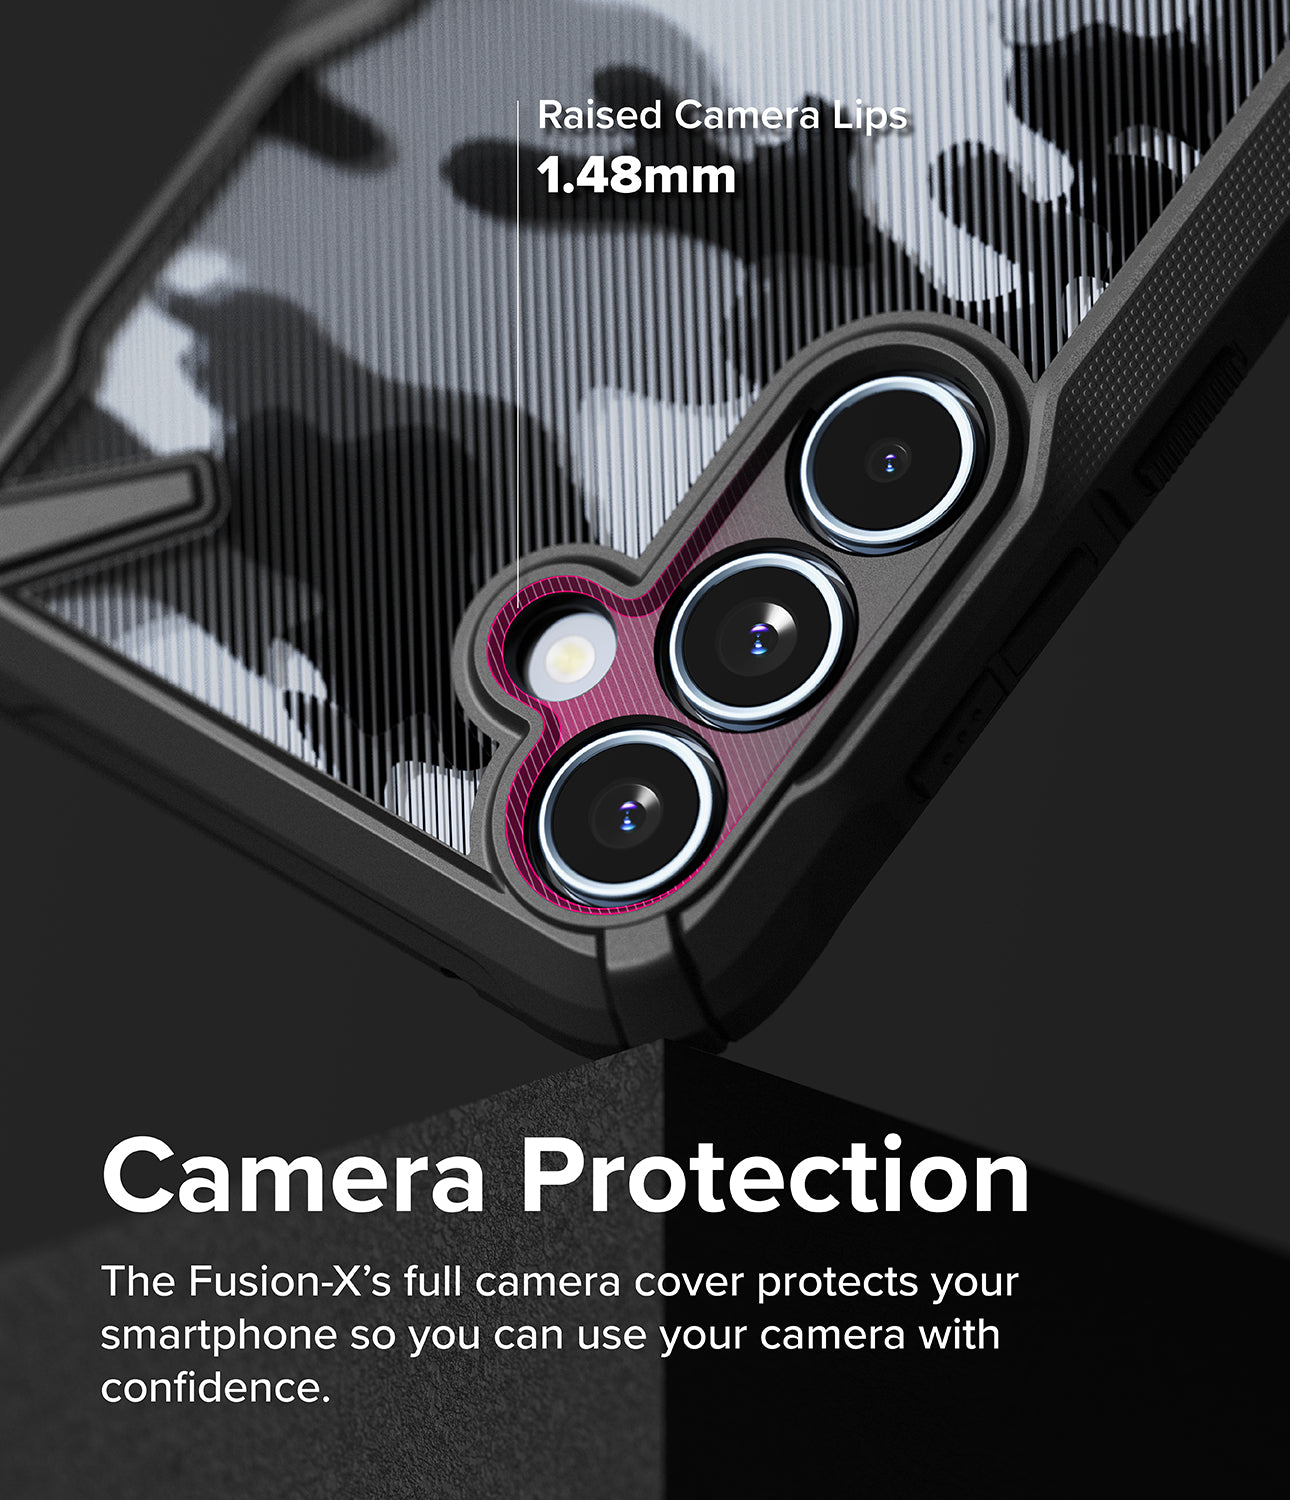 Galaxy A35 Case | Fusion-X - Camera Protection. The Fusion-X's full camera cover protects your smartphone so you can use your camera with confidence.